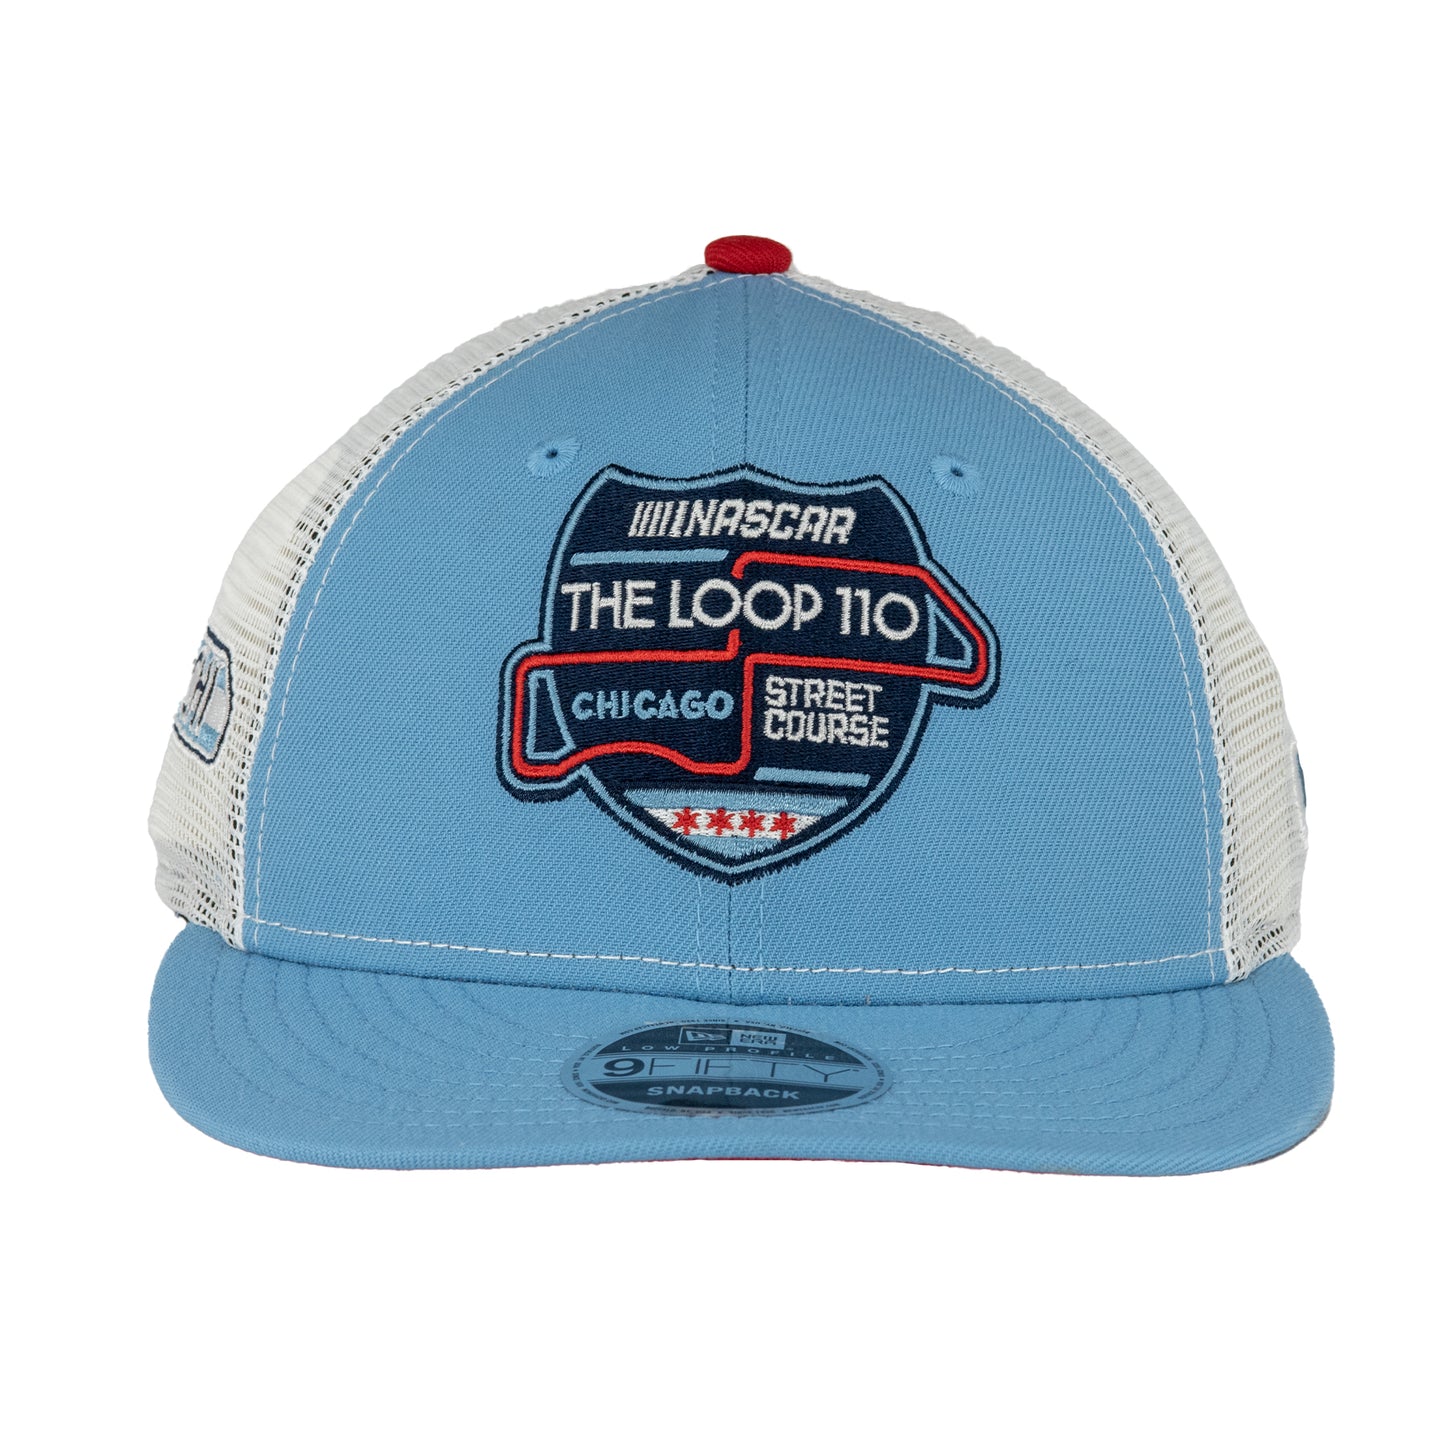 Nascar Chicago Street Race The Loop 110 Sky/Red New Era Low Profile 9FIFTY Trucker Hat